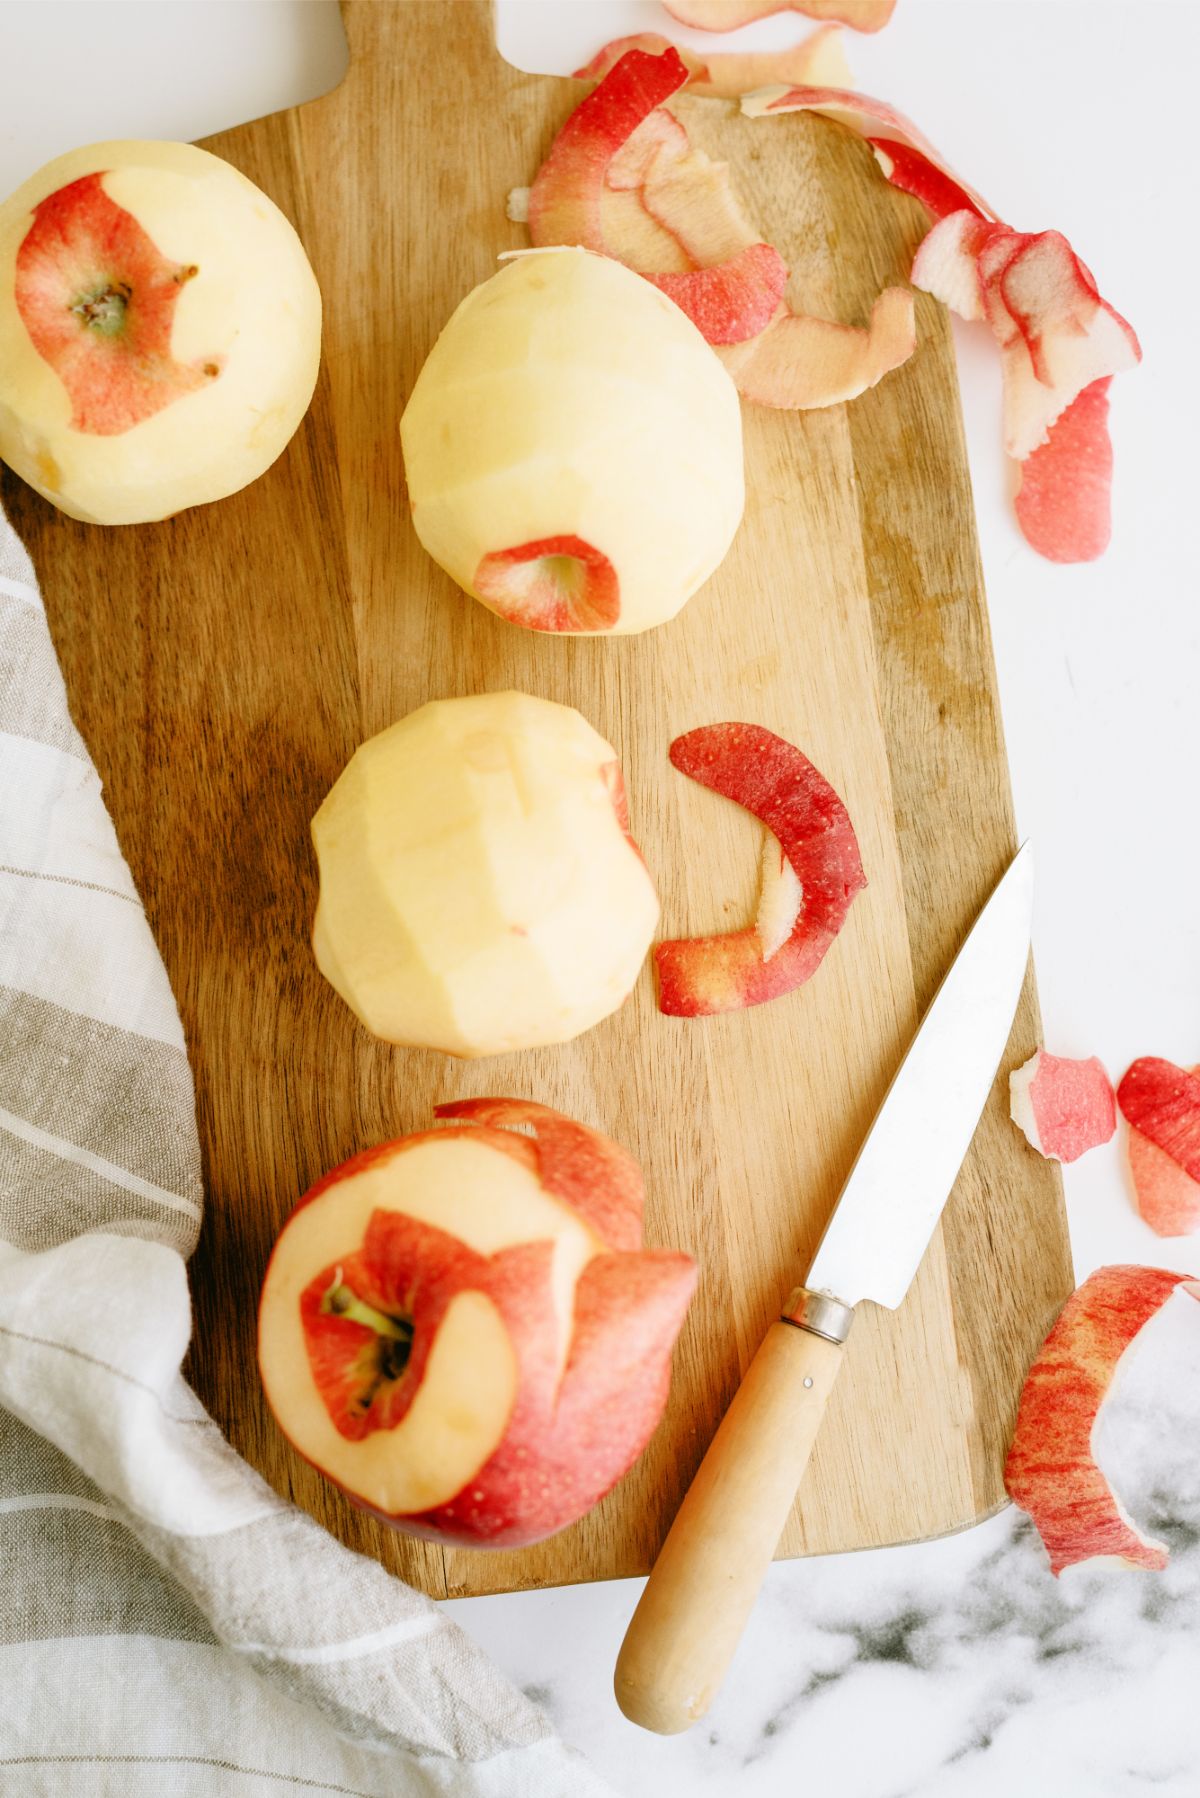 Peeled apples on a cutting board